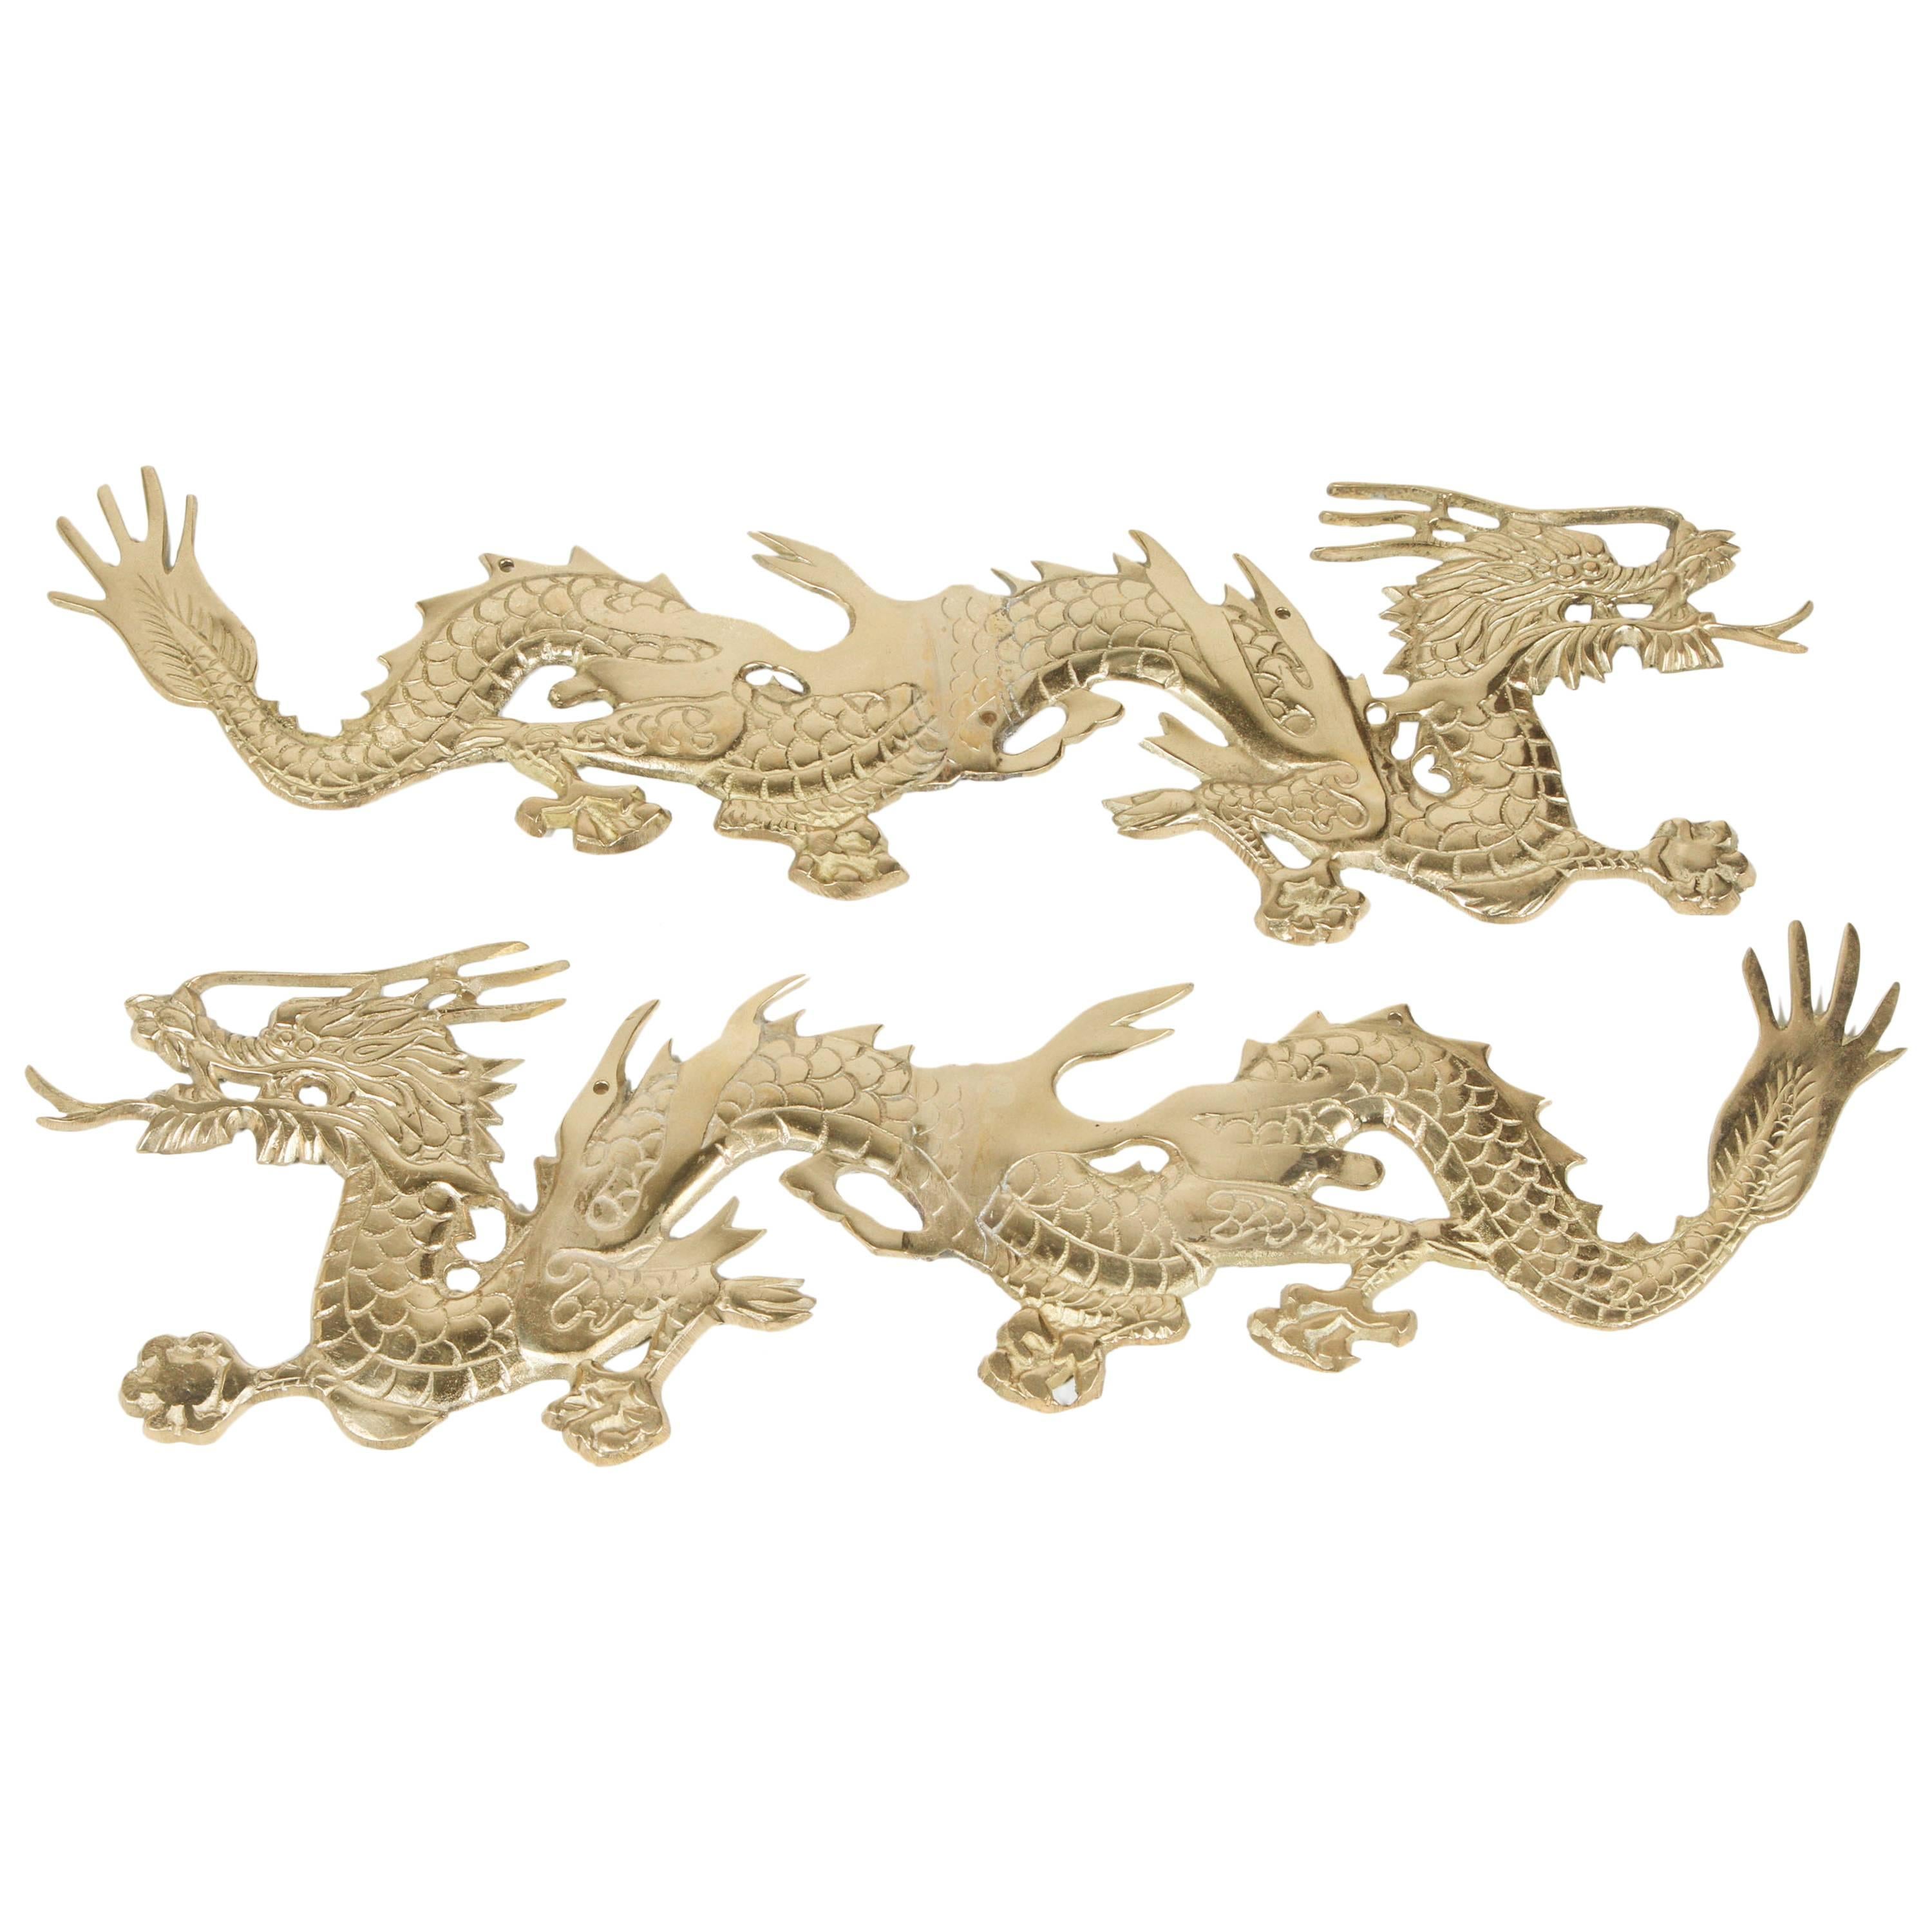 Pair of Asian Brass Dragons Chasing a Ball Wall Mount